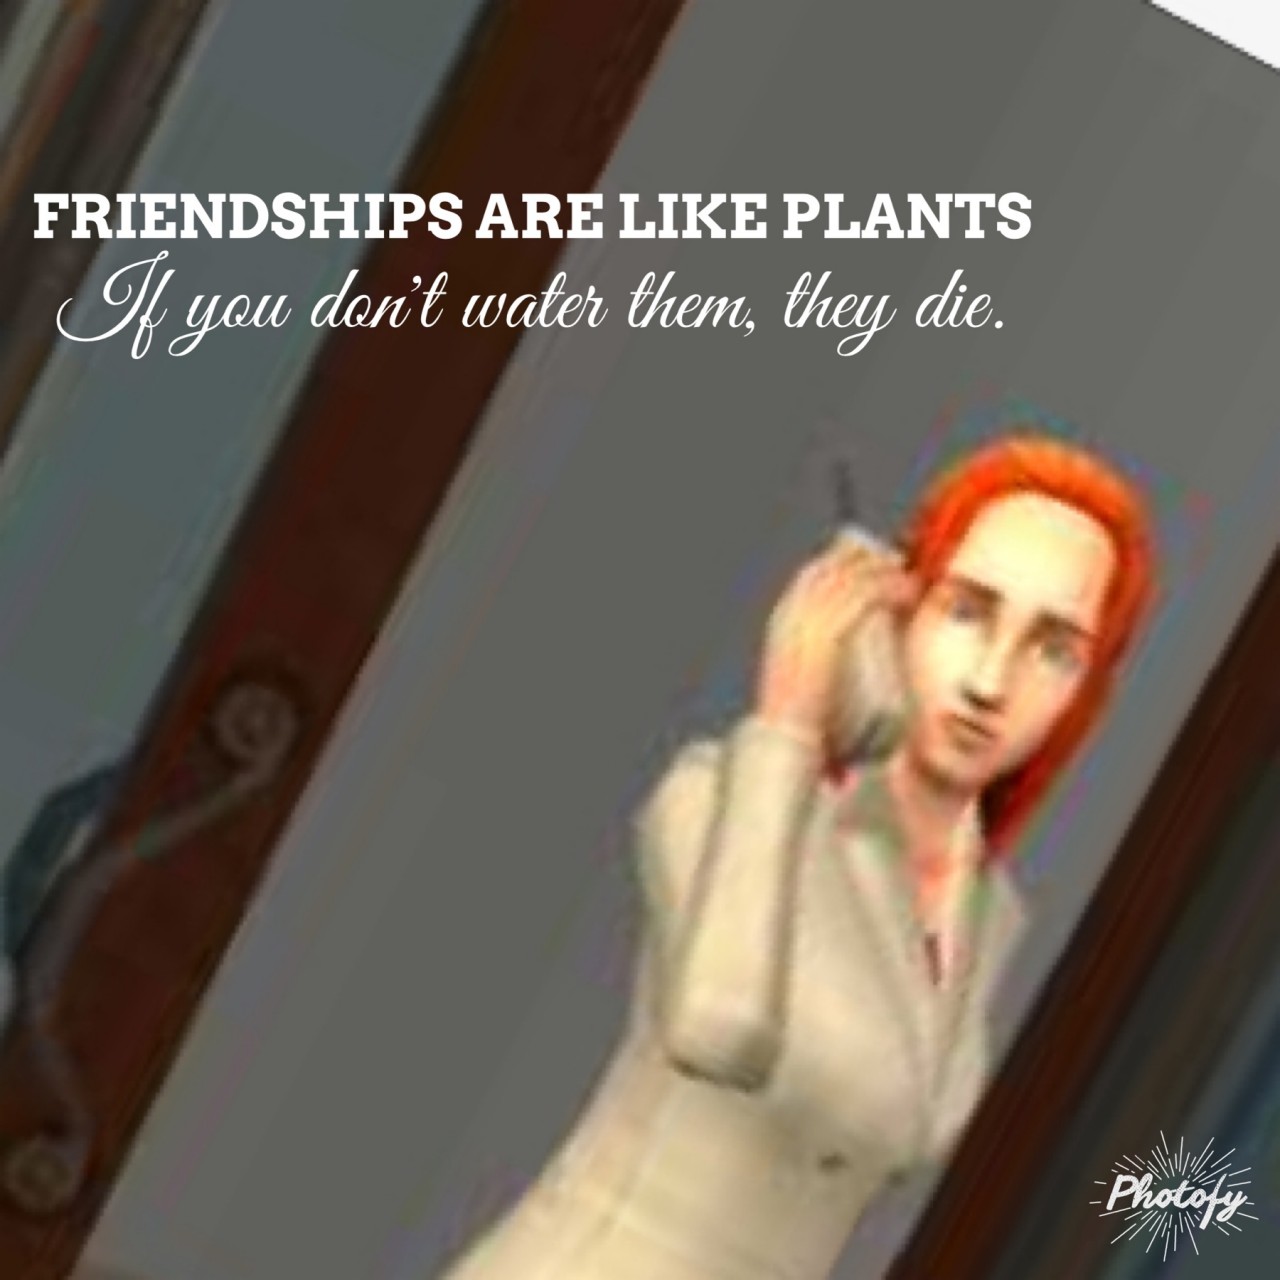 Lessons in Friendship Learned from The Sims